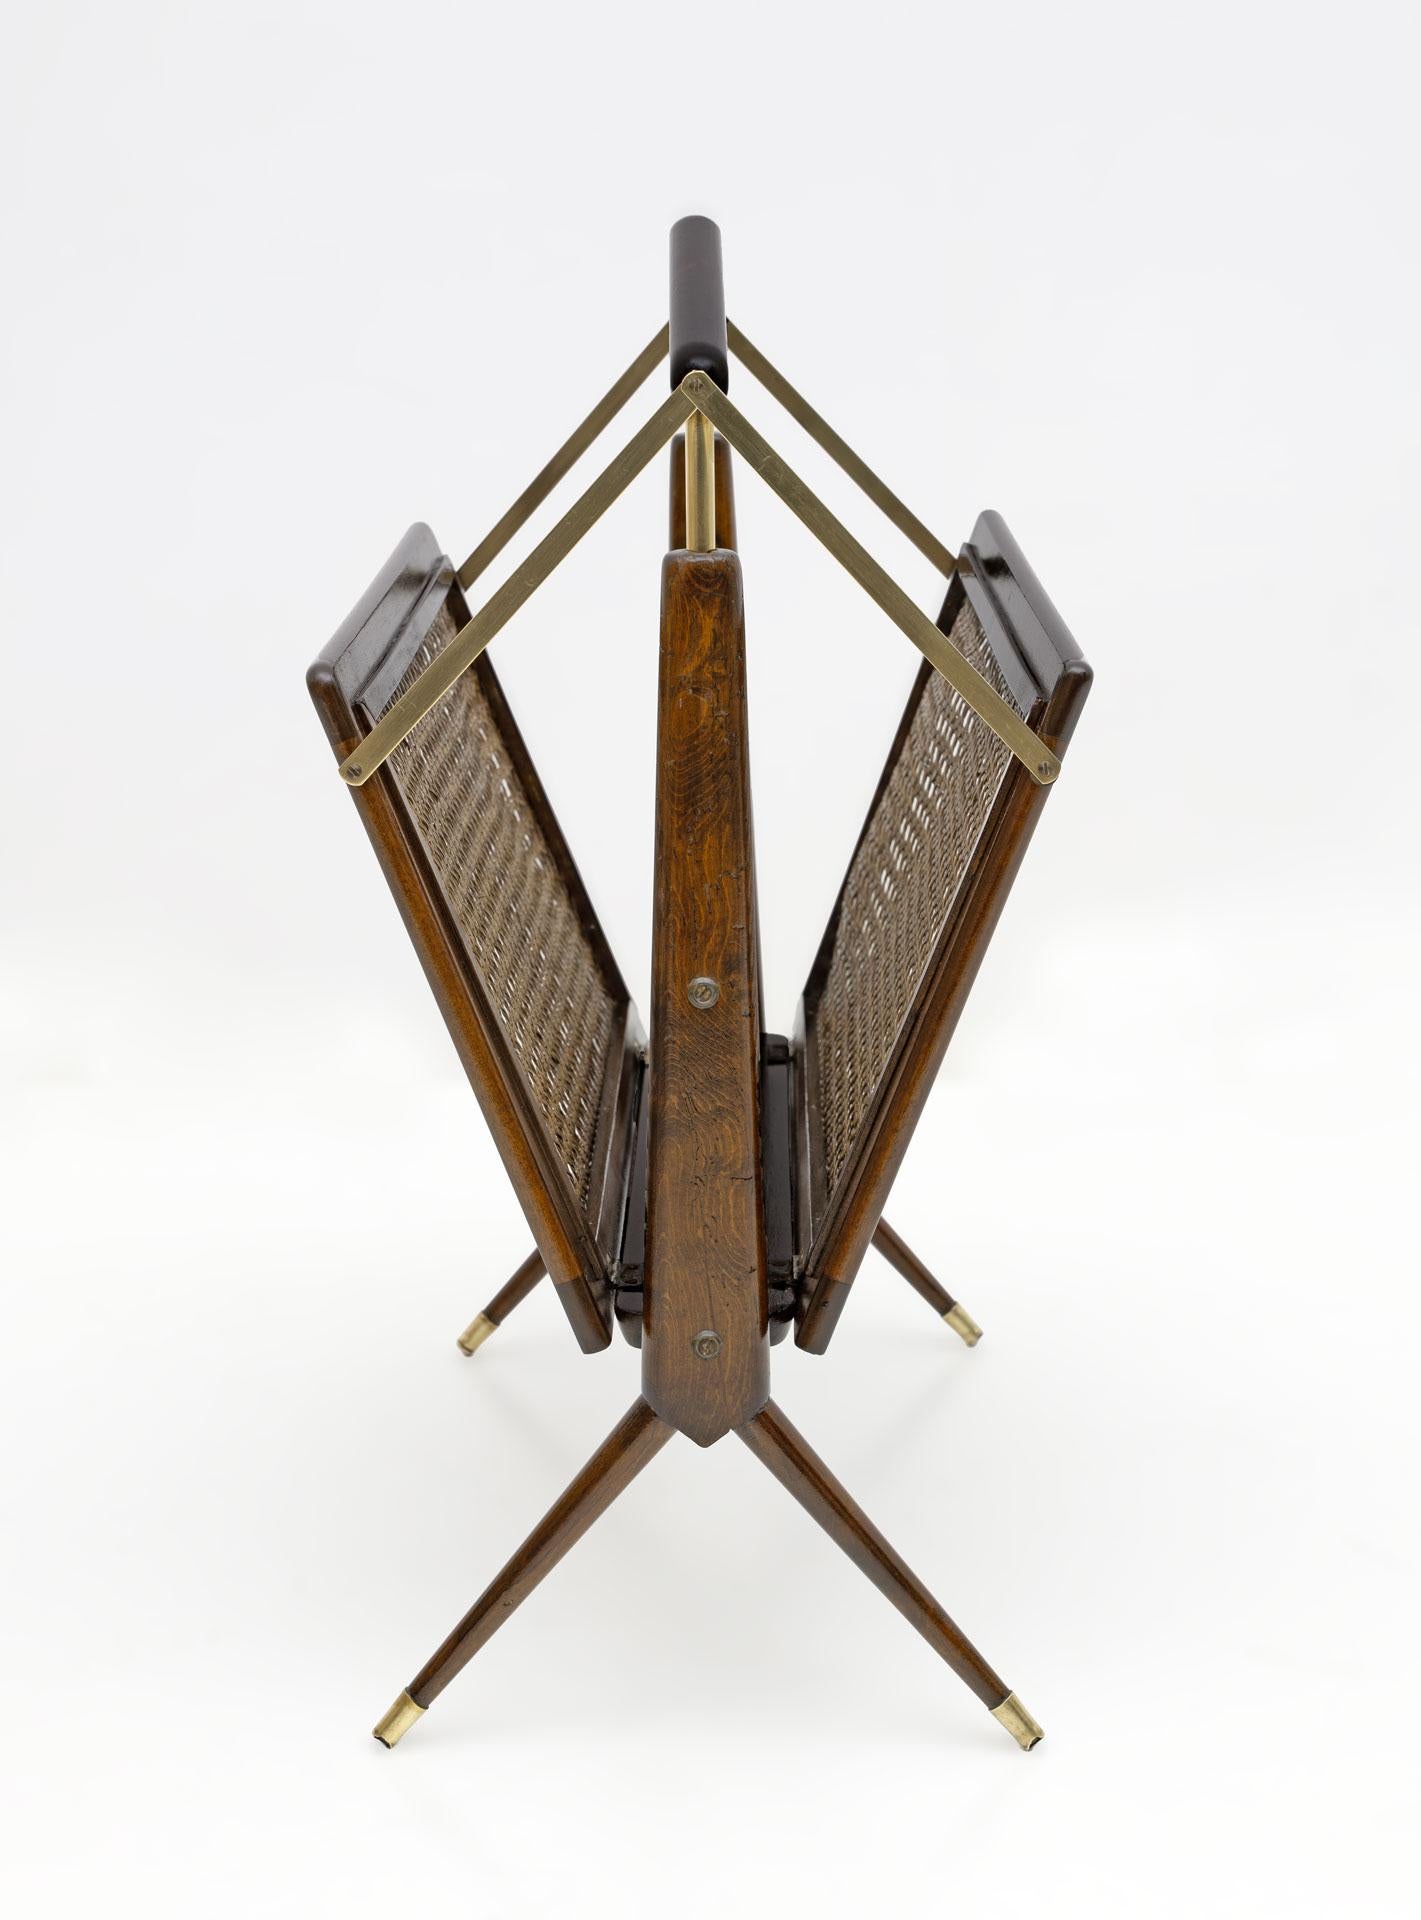 Italian, mid-century modern, walnut, wicker and brass, Cesare Lacca magazine rack folds away from handle for mobility, ingenious design.
Restored and polished with shellac.